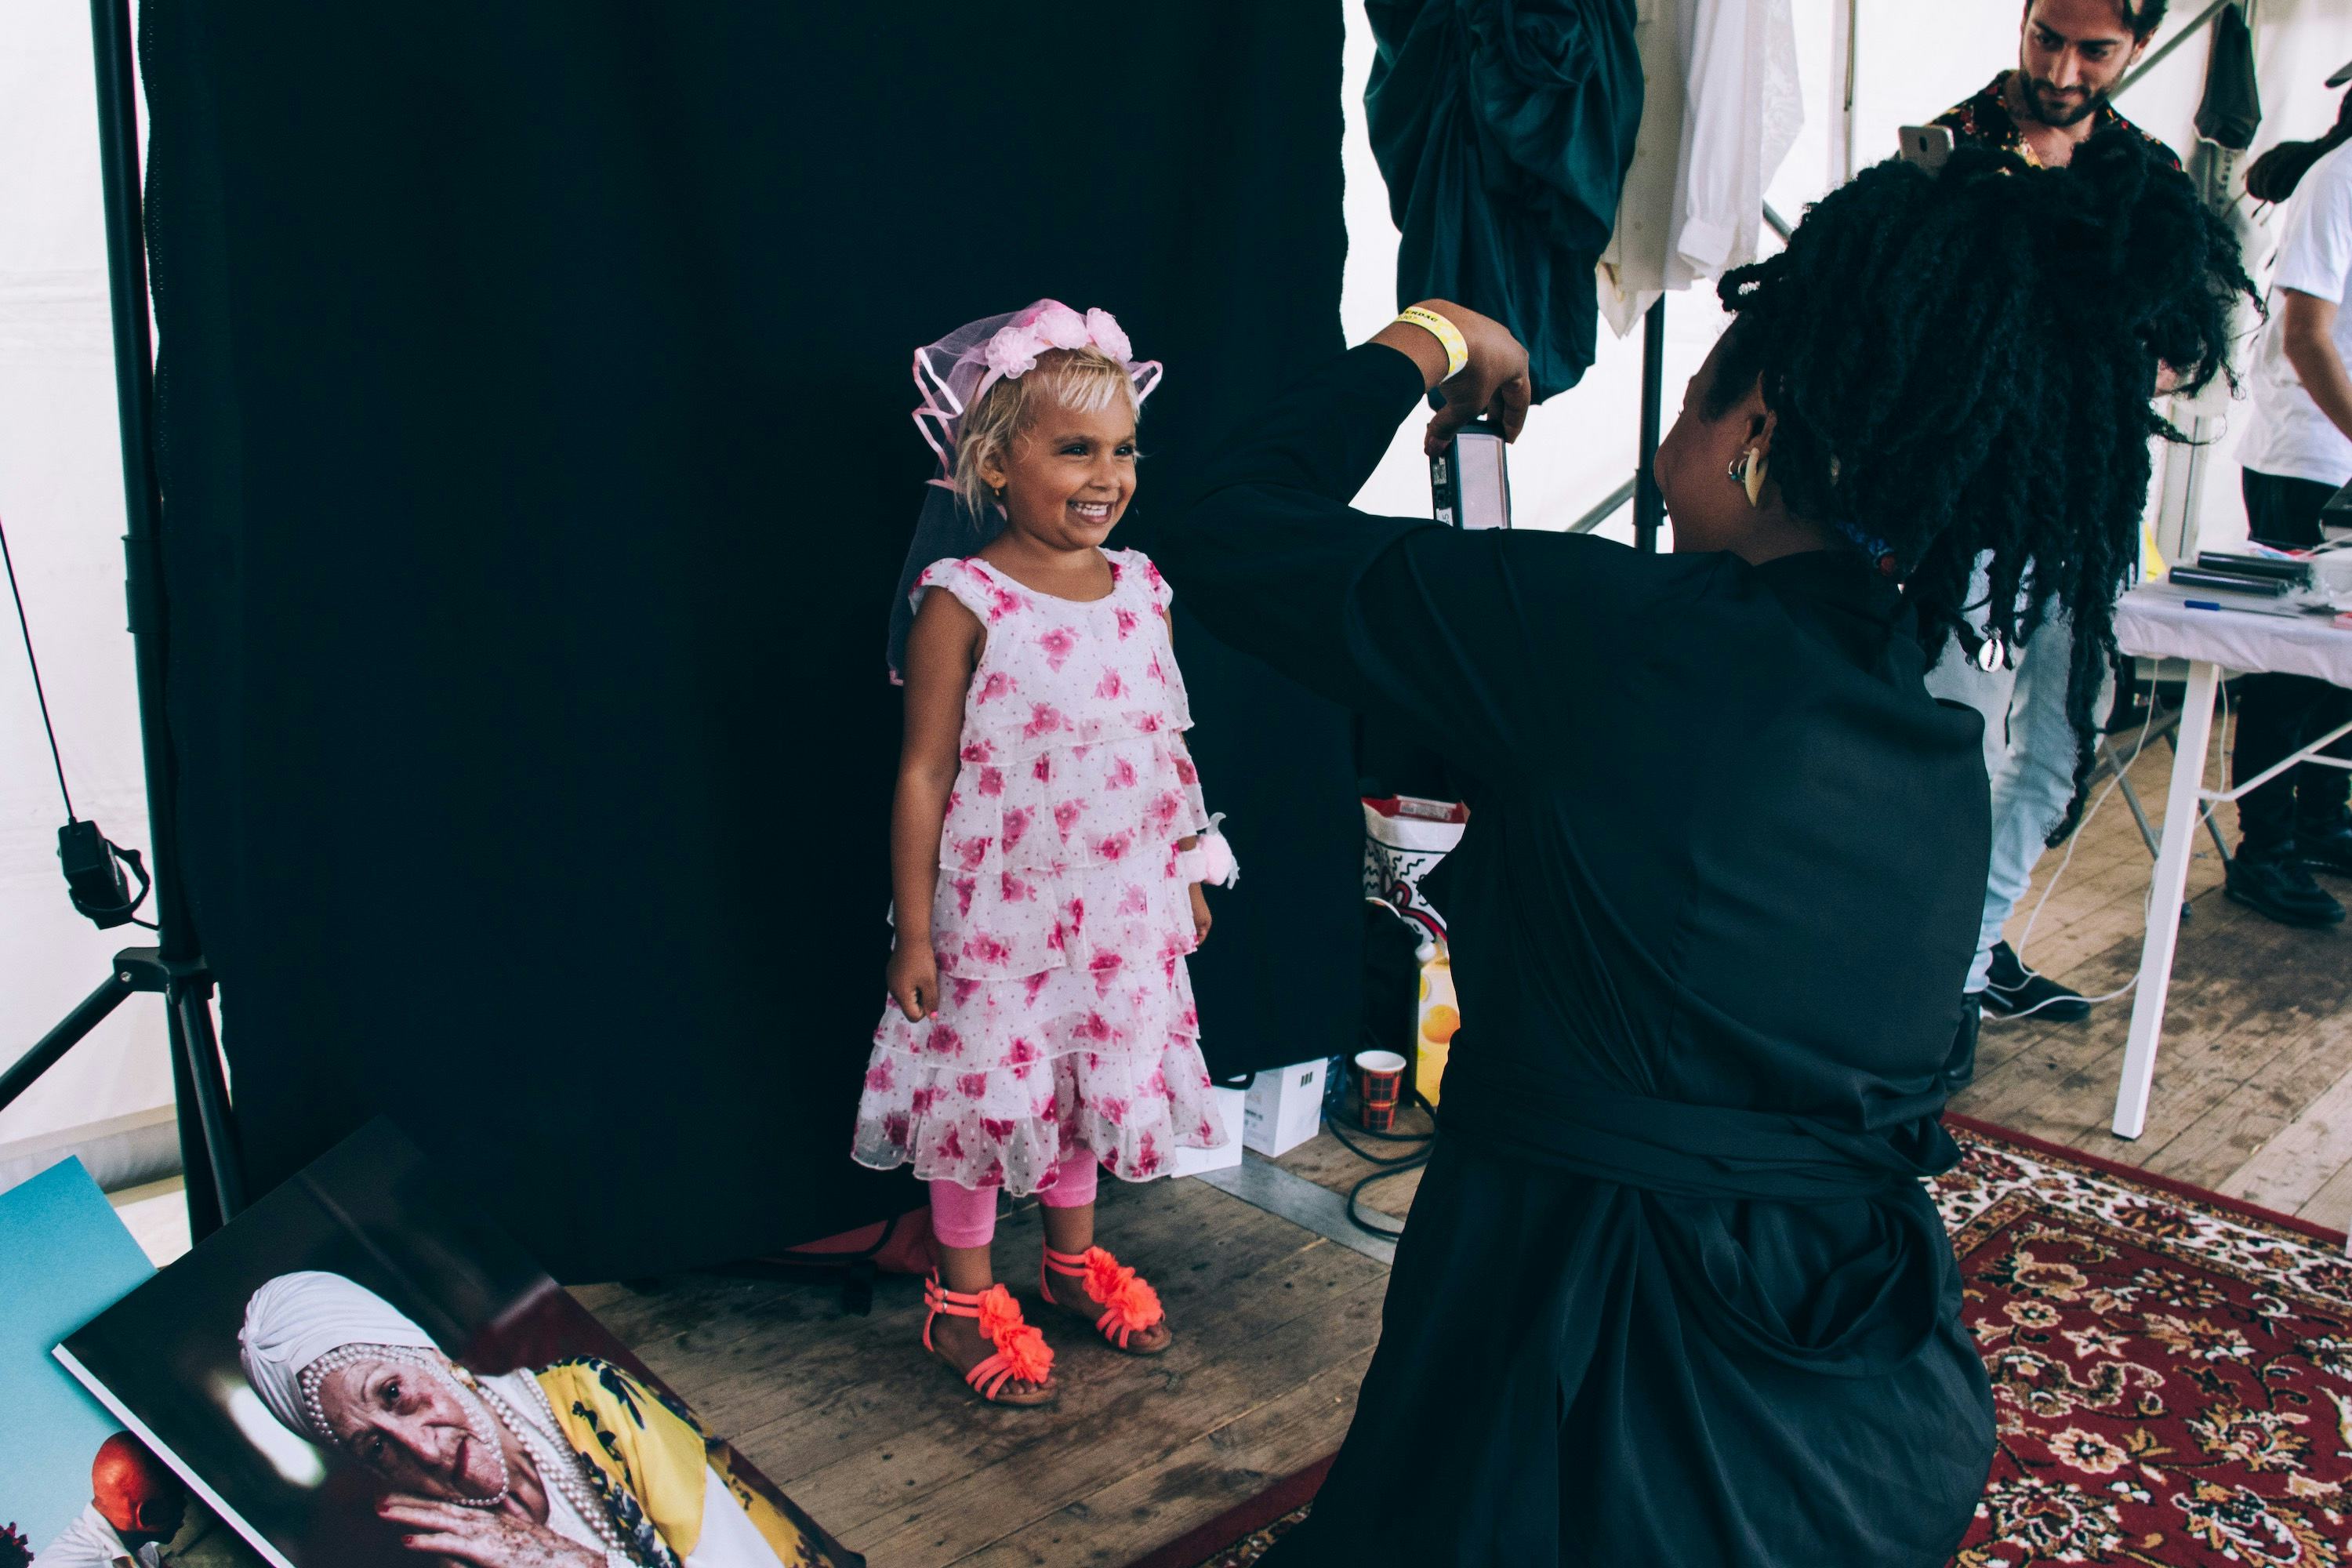 Photo of a young girl in a pink dressing getting her portrait taken.